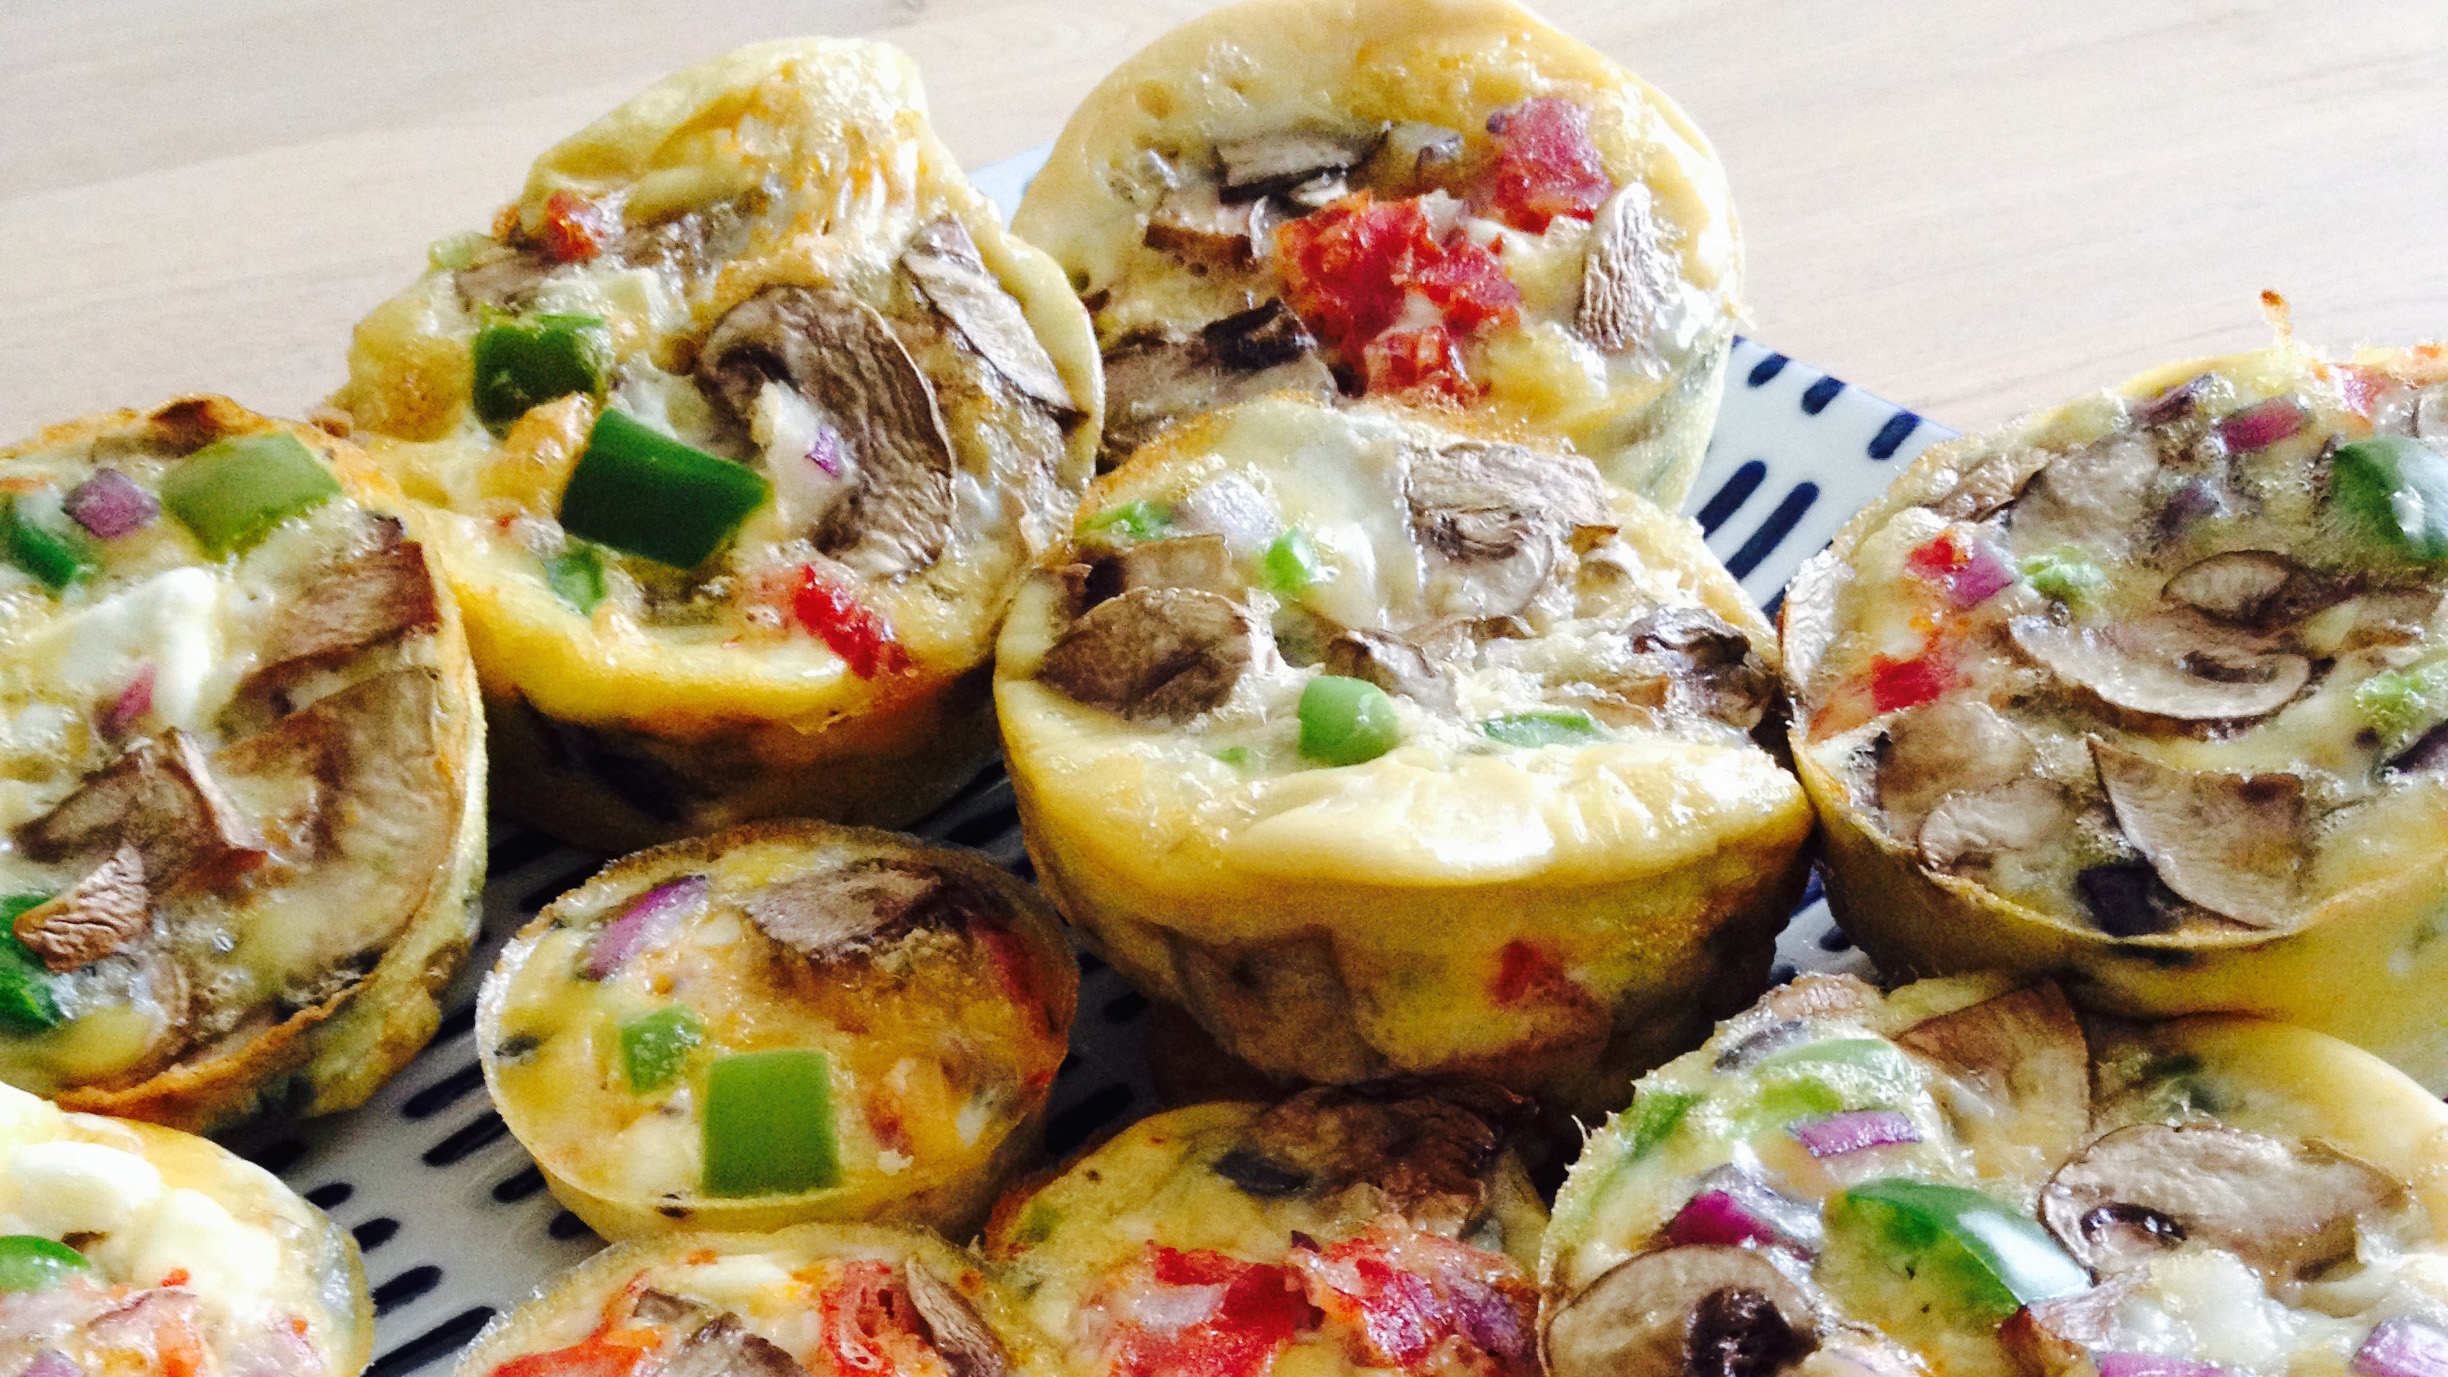 Healthy snack or breakfast – Egg muffins and Frittata.